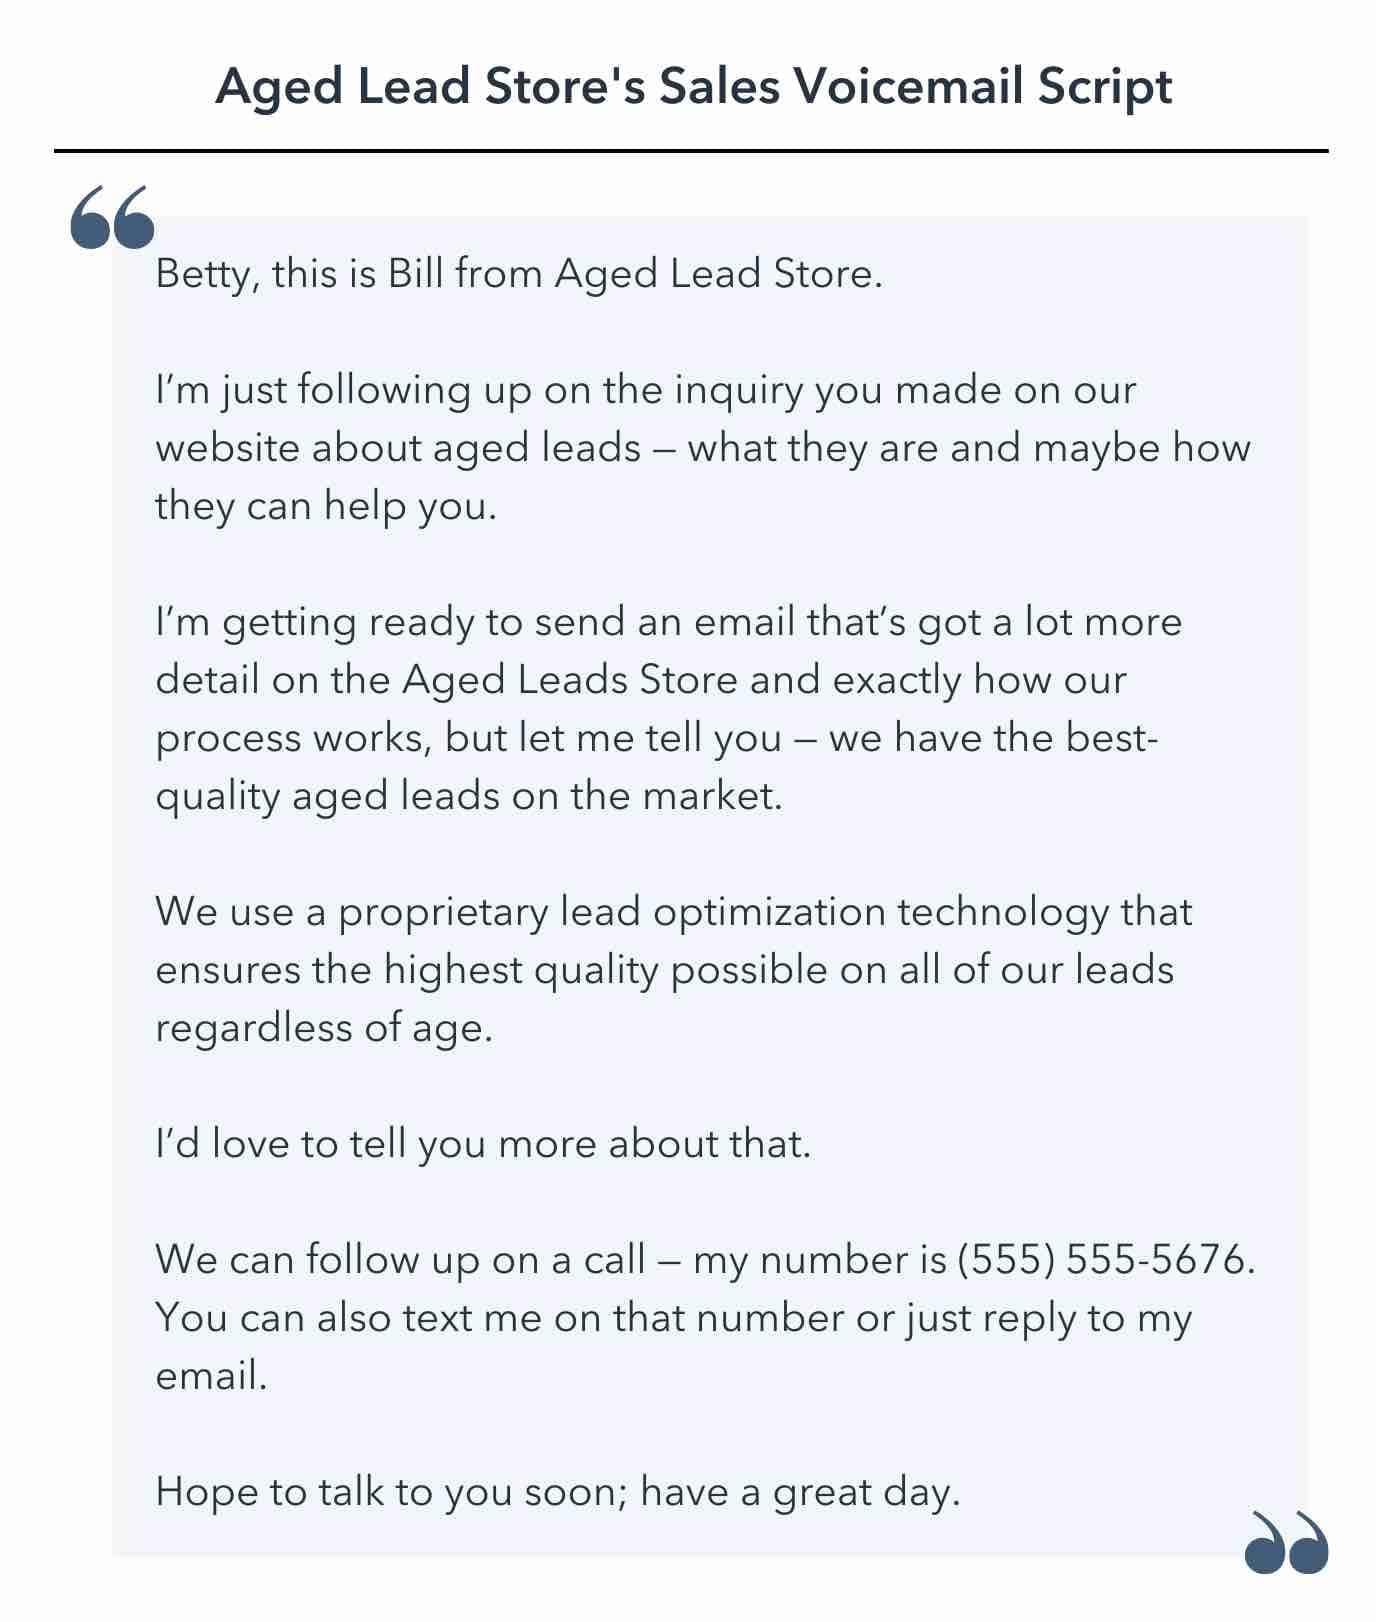 sales voicemail script template, Betty, this is Bill from Aged Lead Store. I’m just following up on the inquiry you made on our website about aged leads — what they are and maybe how they can help you. I’m getting ready to send an email that’s got a lot more detail on the Aged Leads Store and exactly how our process works, but let me tell you — we have the best-quality aged leads on the market. We use a proprietary lead optimization technology that ensures the highest quality possible on all of our leads regardless of age. I’d love to tell you more about that. We can follow up on a call — my number is (555) 555-5676. You can also text me on that number or just reply to my email. Hope to talk to you soon; have a great day.